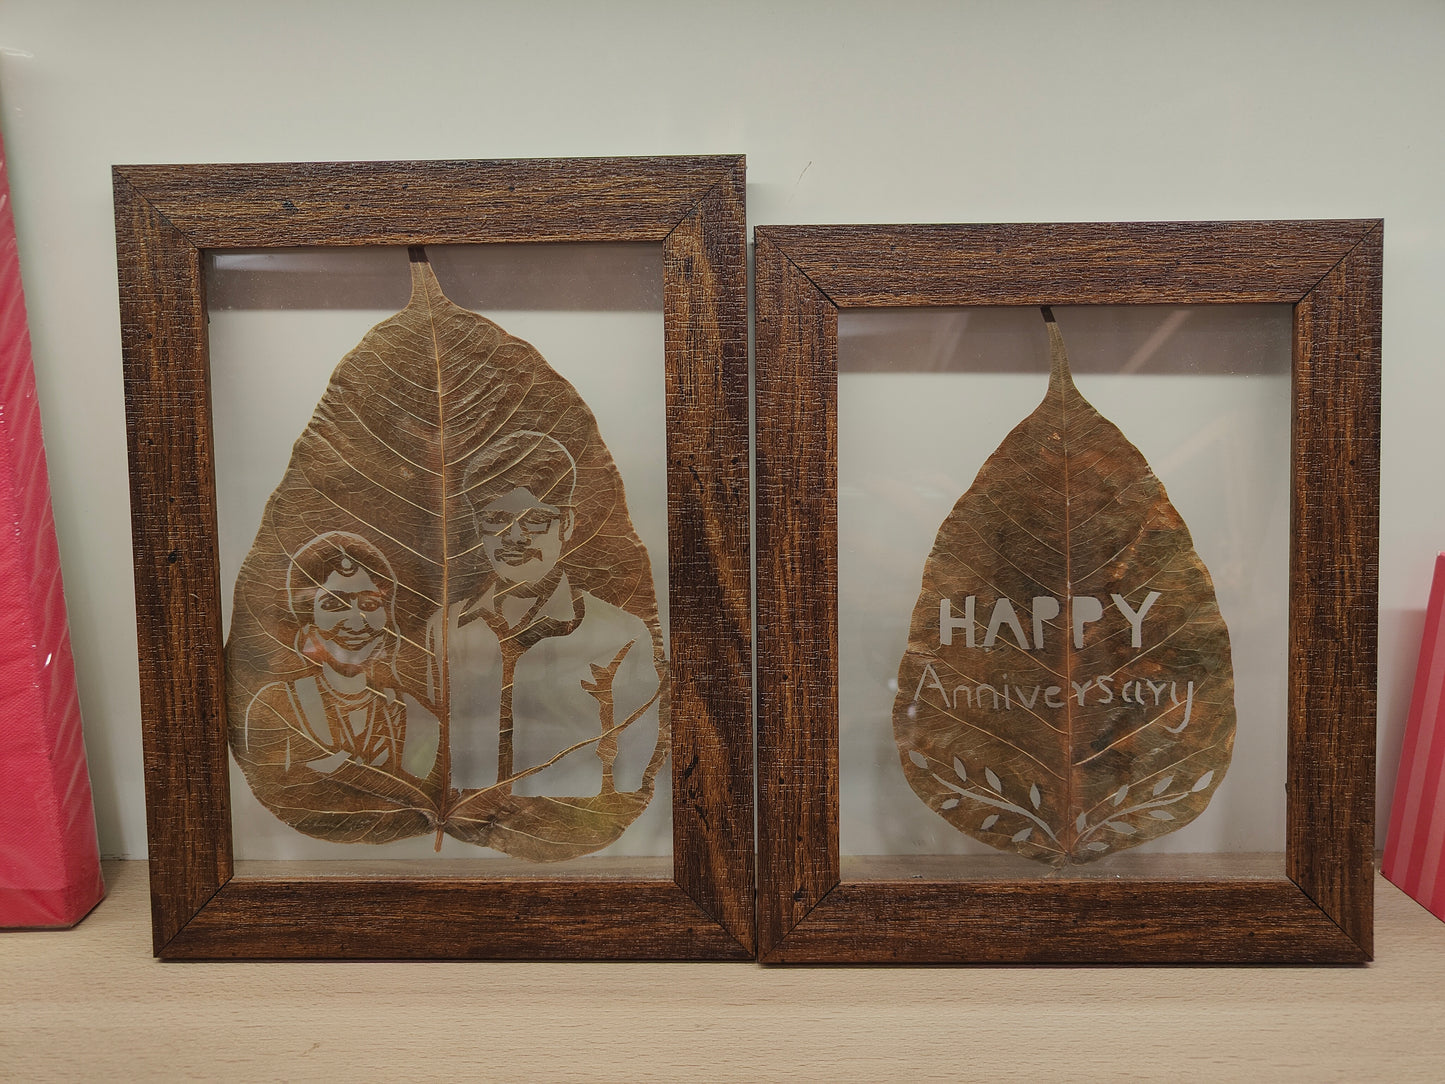 Customized Leaf Art Portrait With Table Top Frame